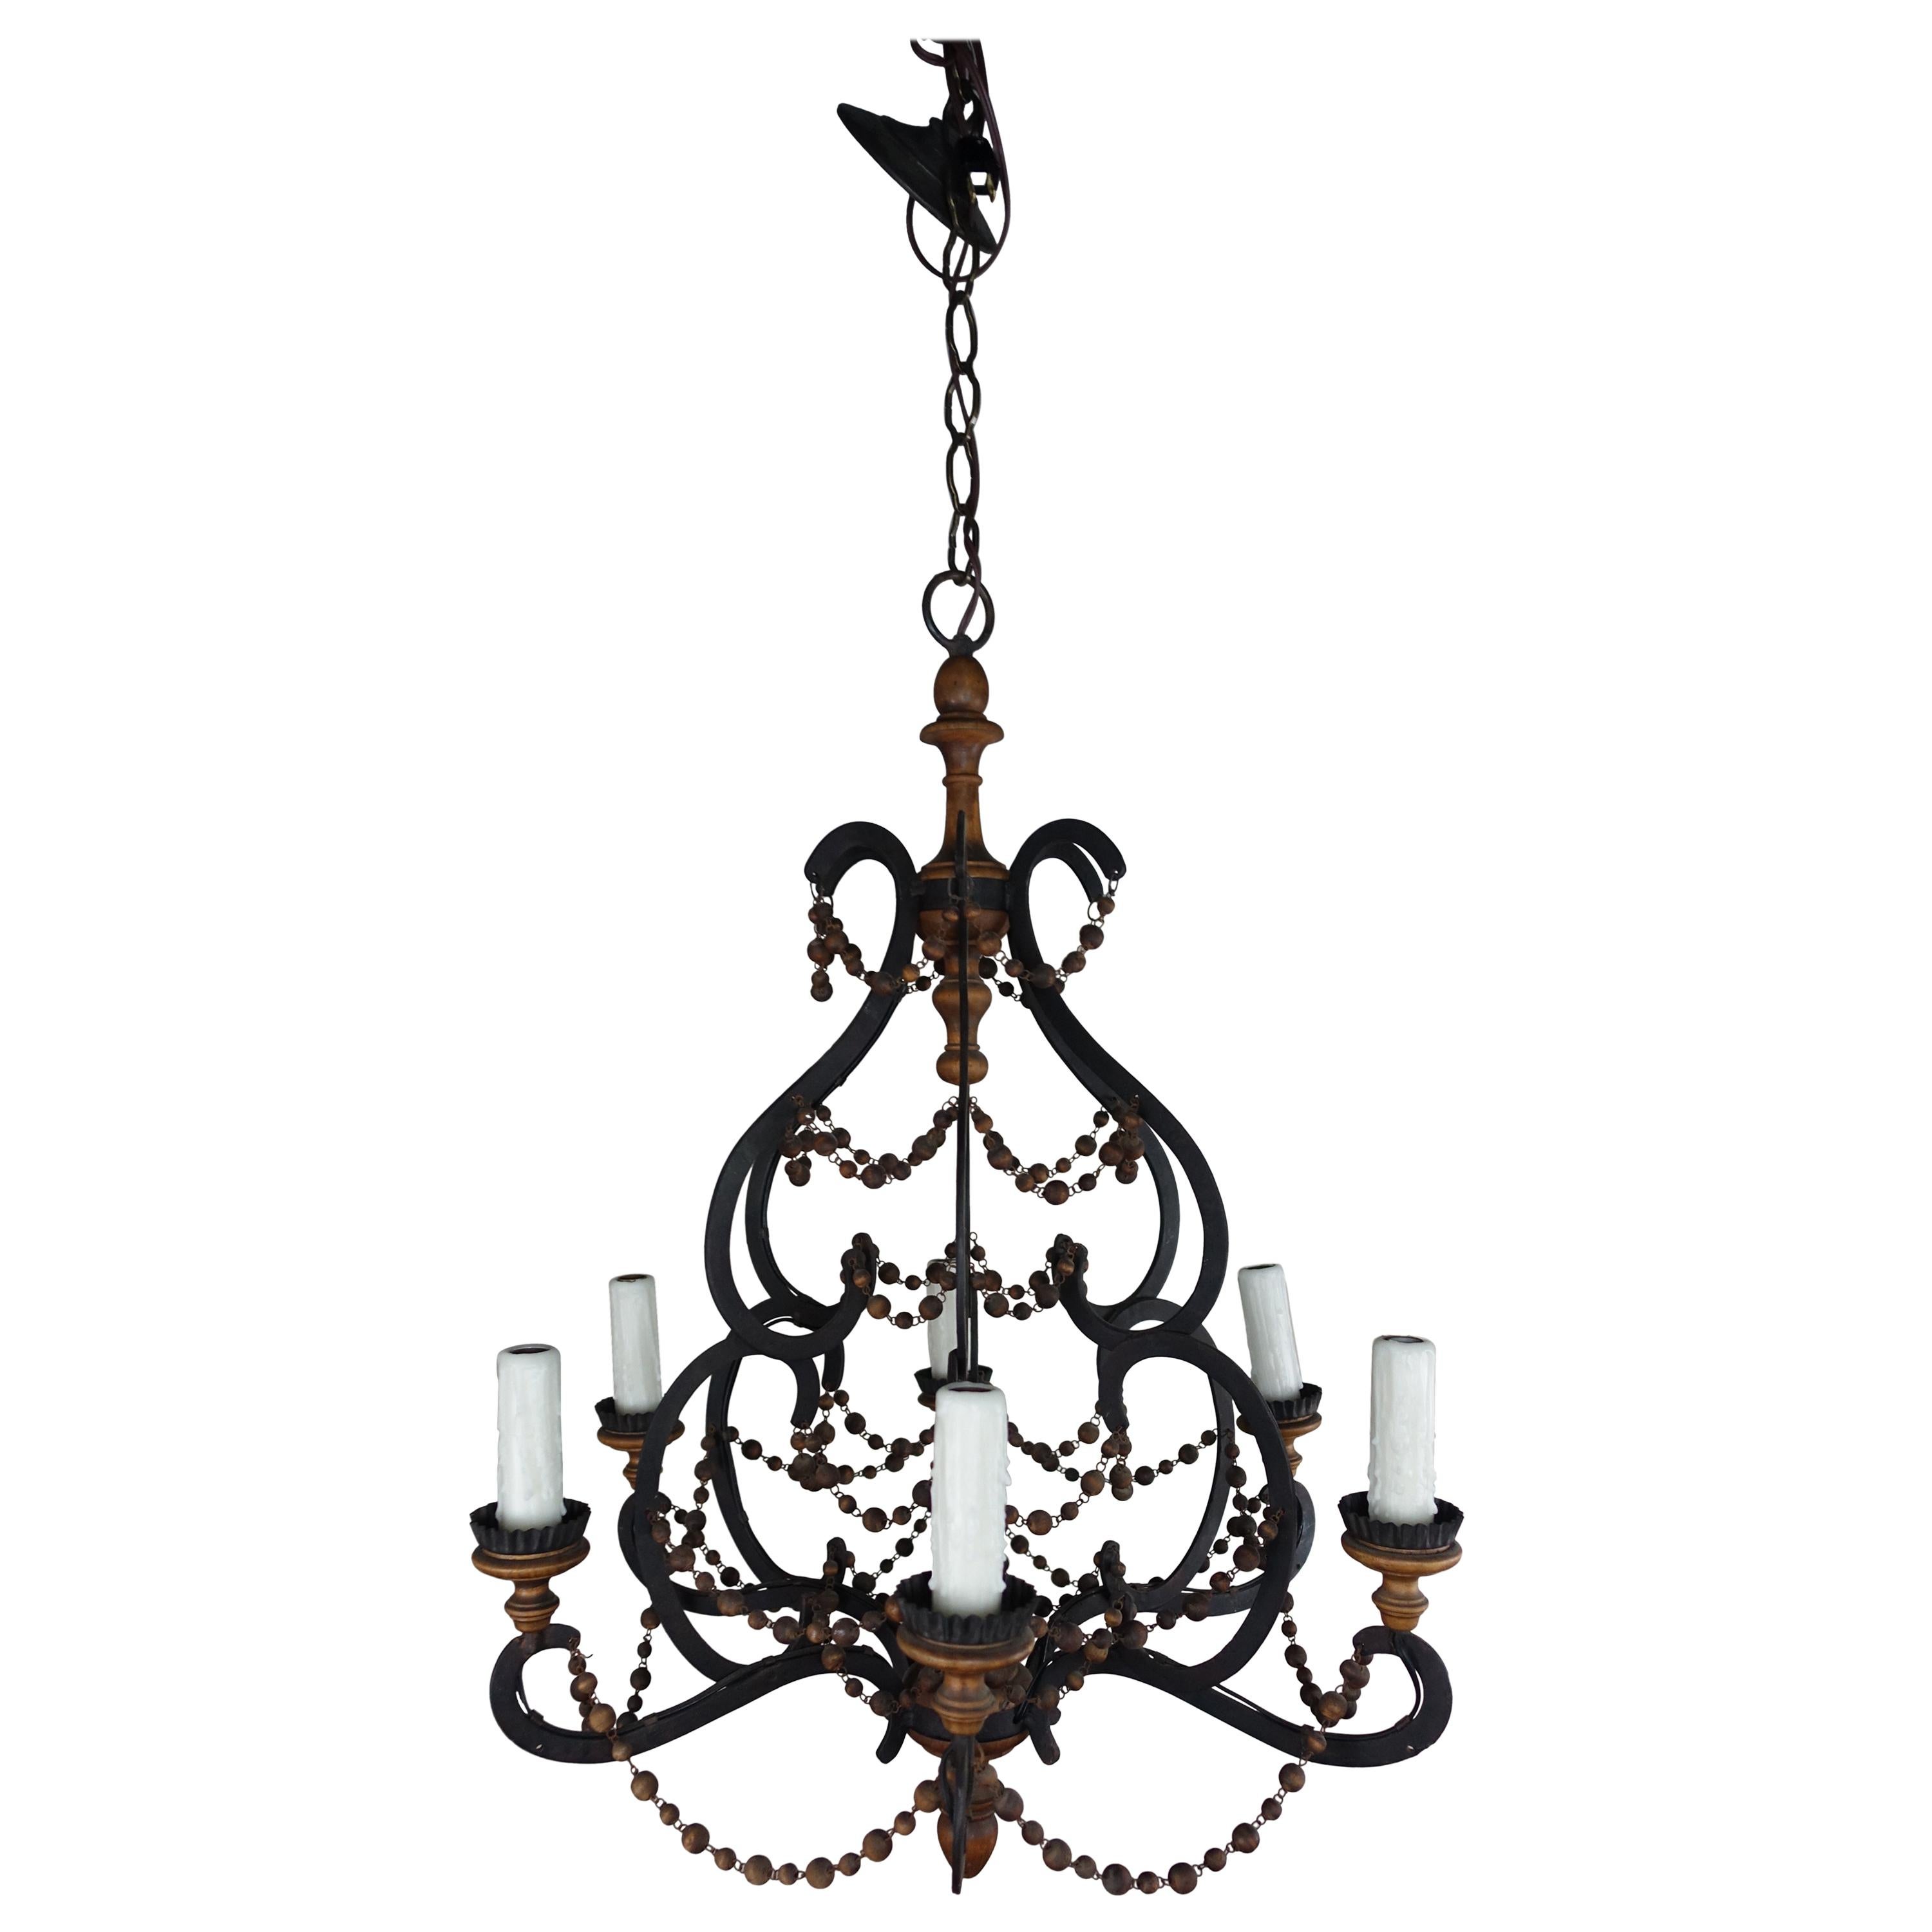 Spanish Wrought Iron and Wood Beaded Chandelier